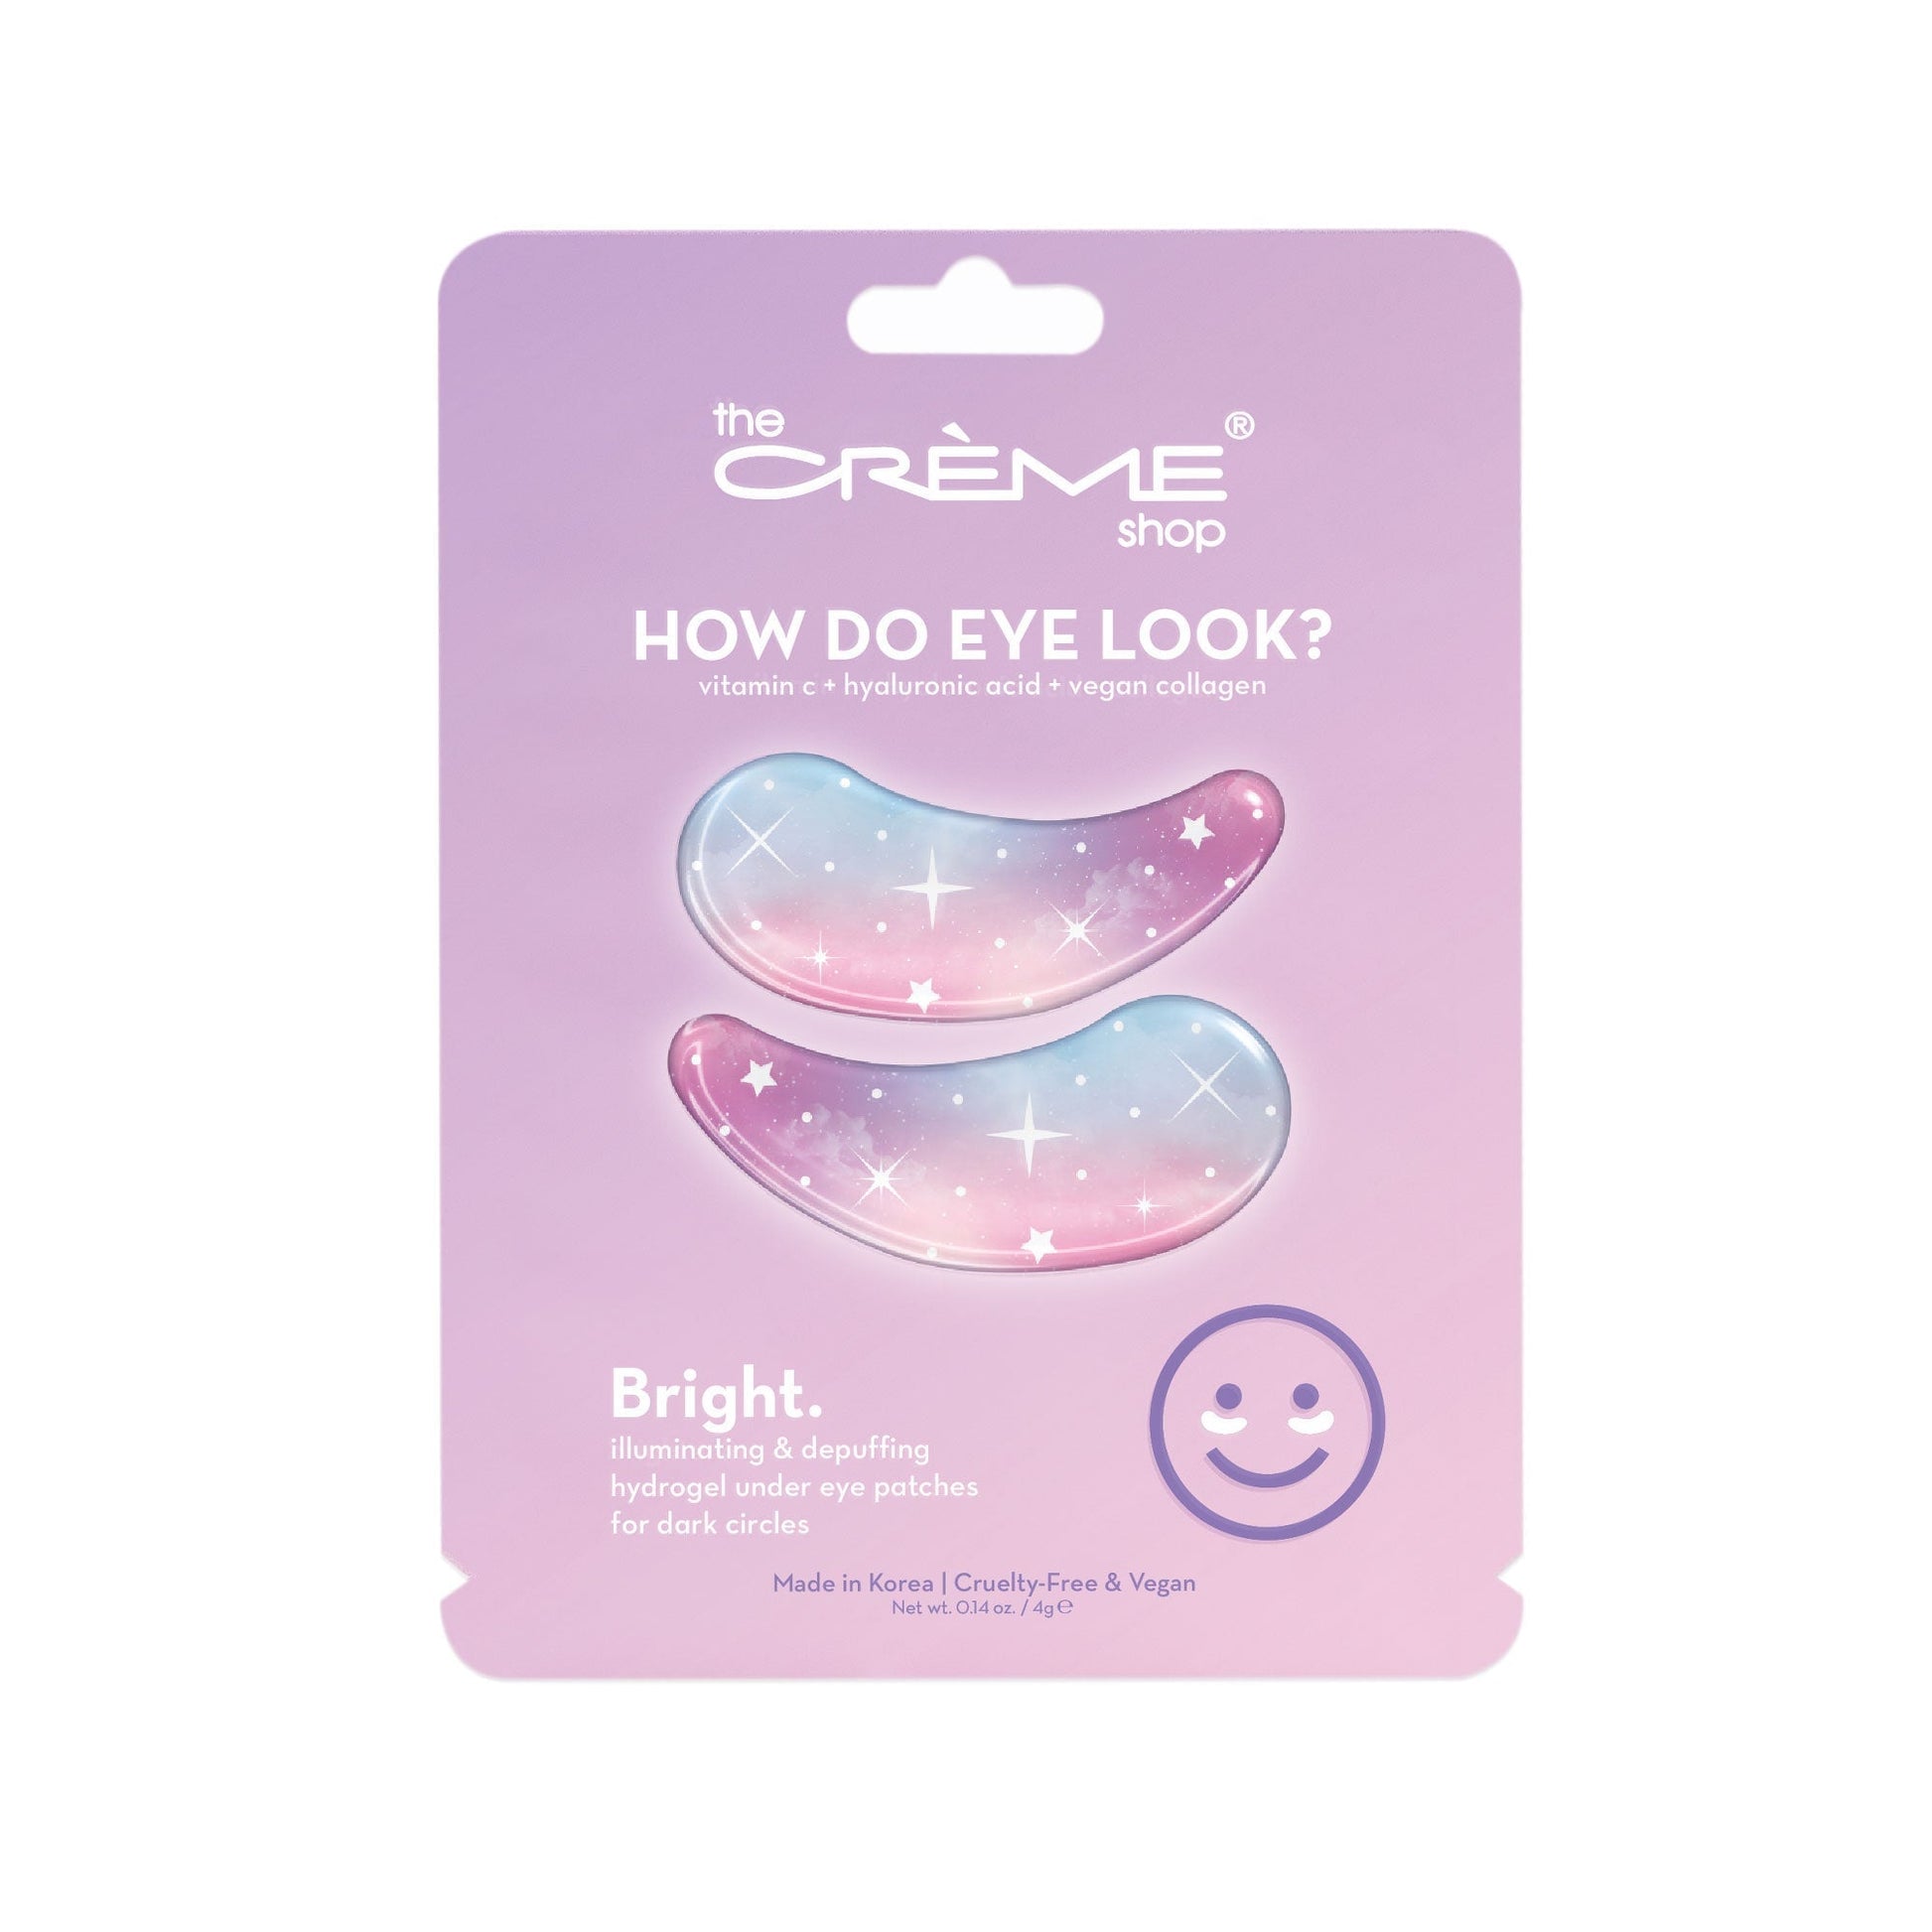 How Do Eye Look? Bright Under Eye Patches for brightening & depuffing Under Eye Patches The Crème Shop, $4 